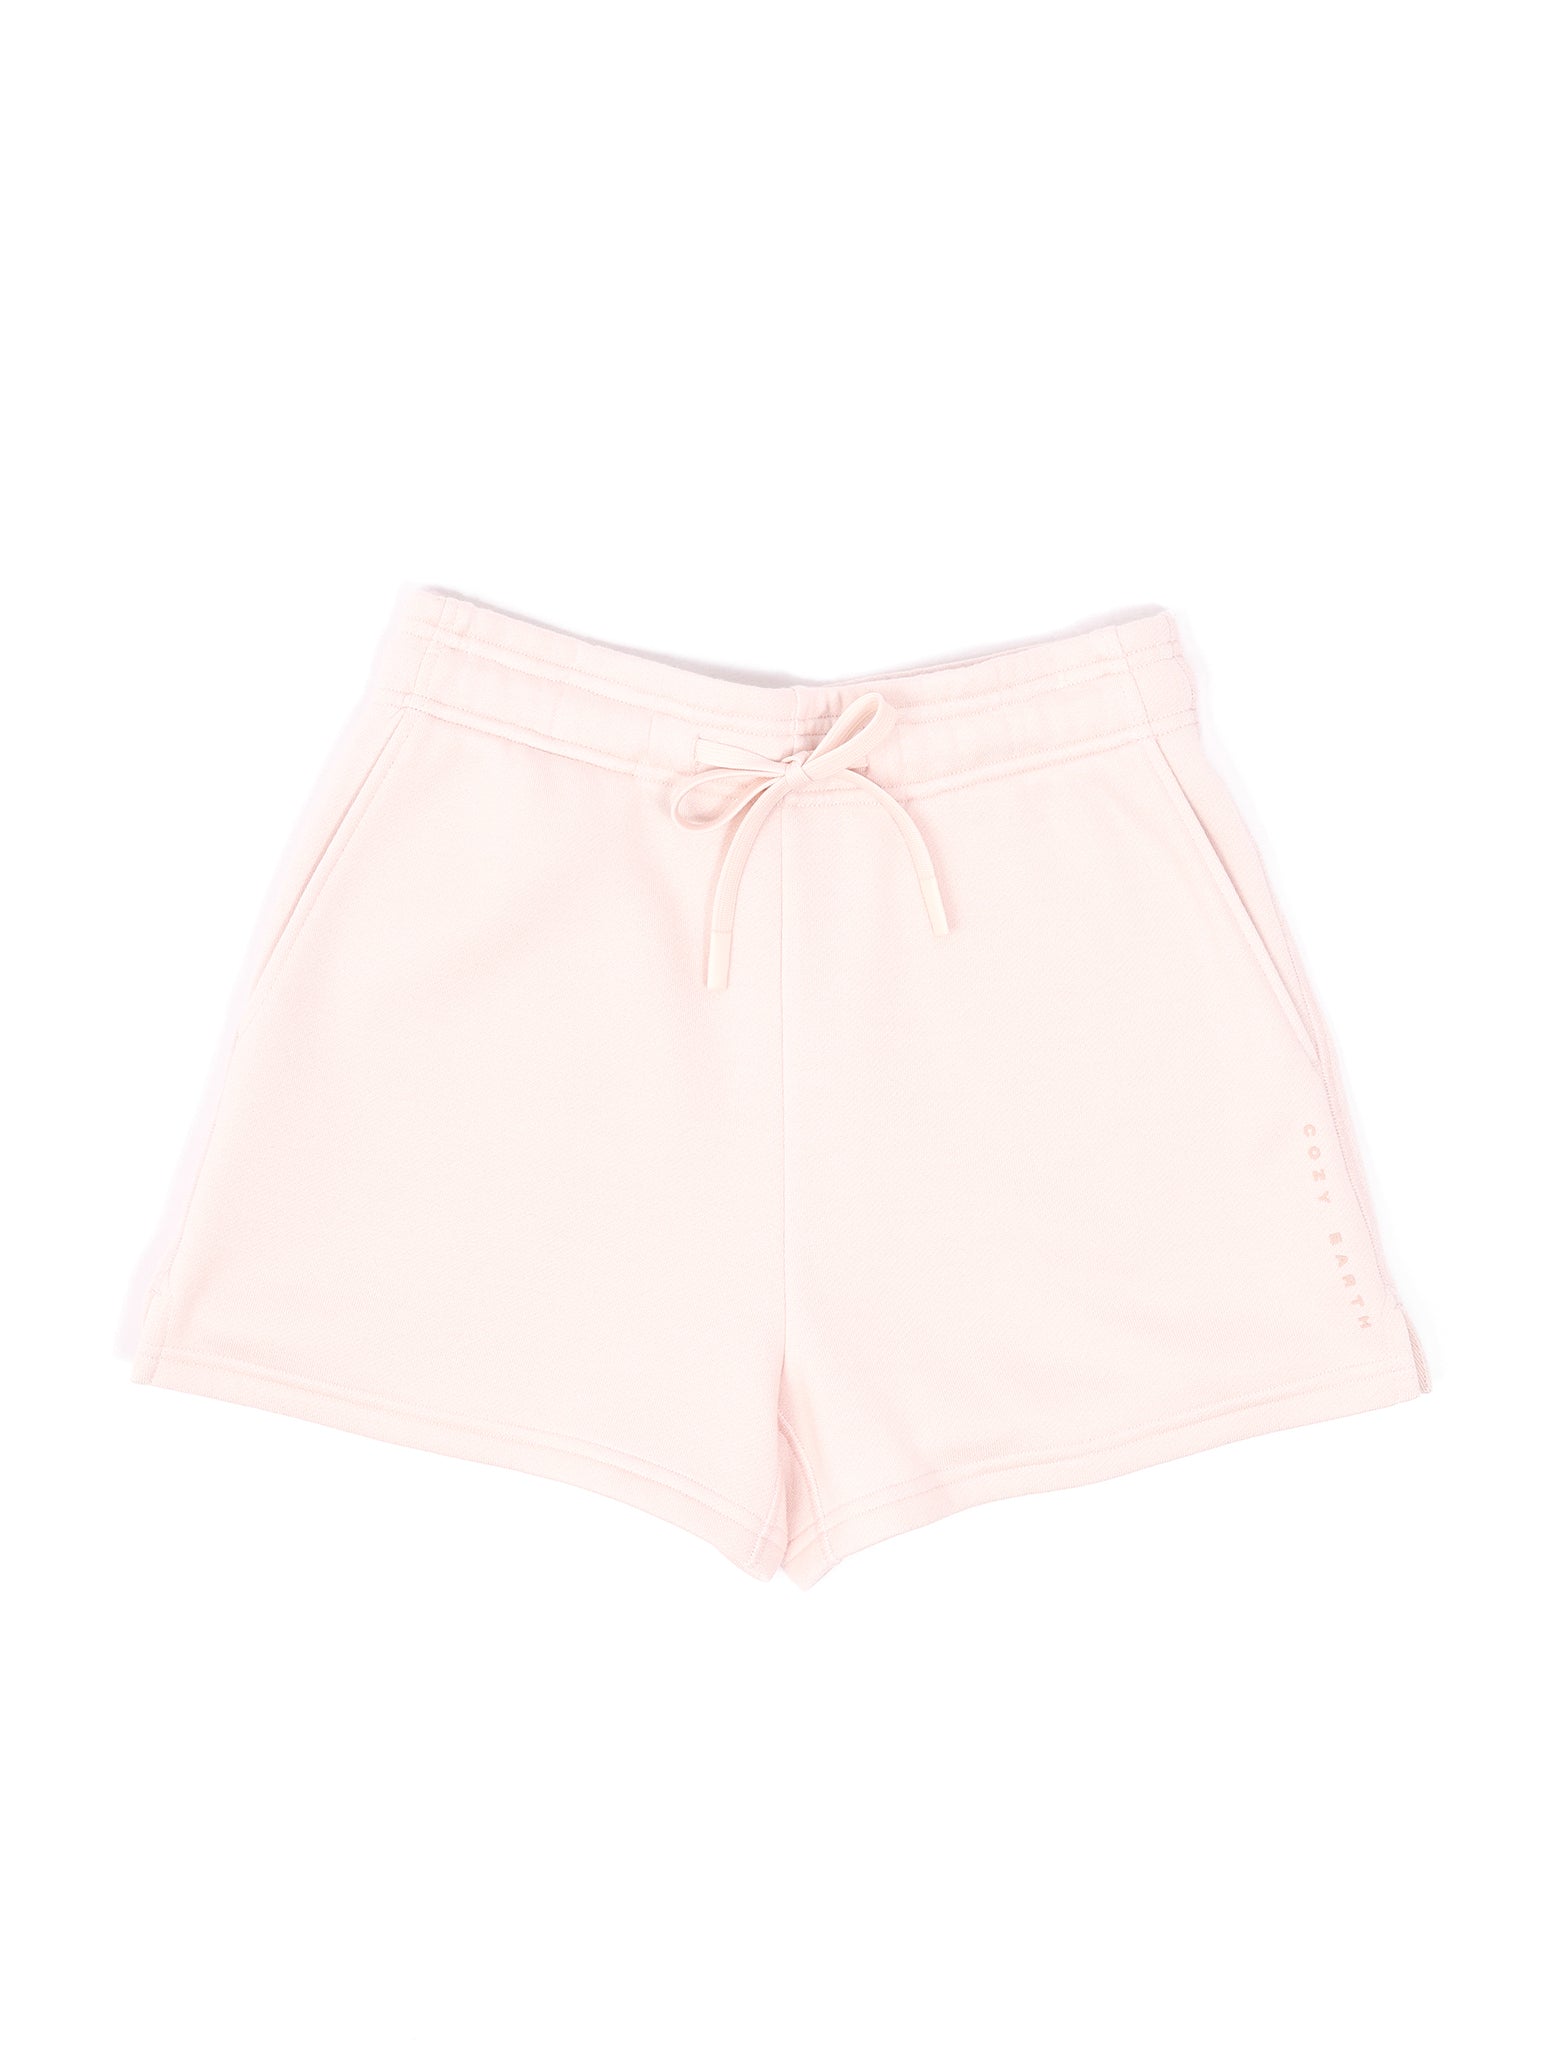 Peony CityScape Shorts. The shorts are laying flat over a background that is white. 